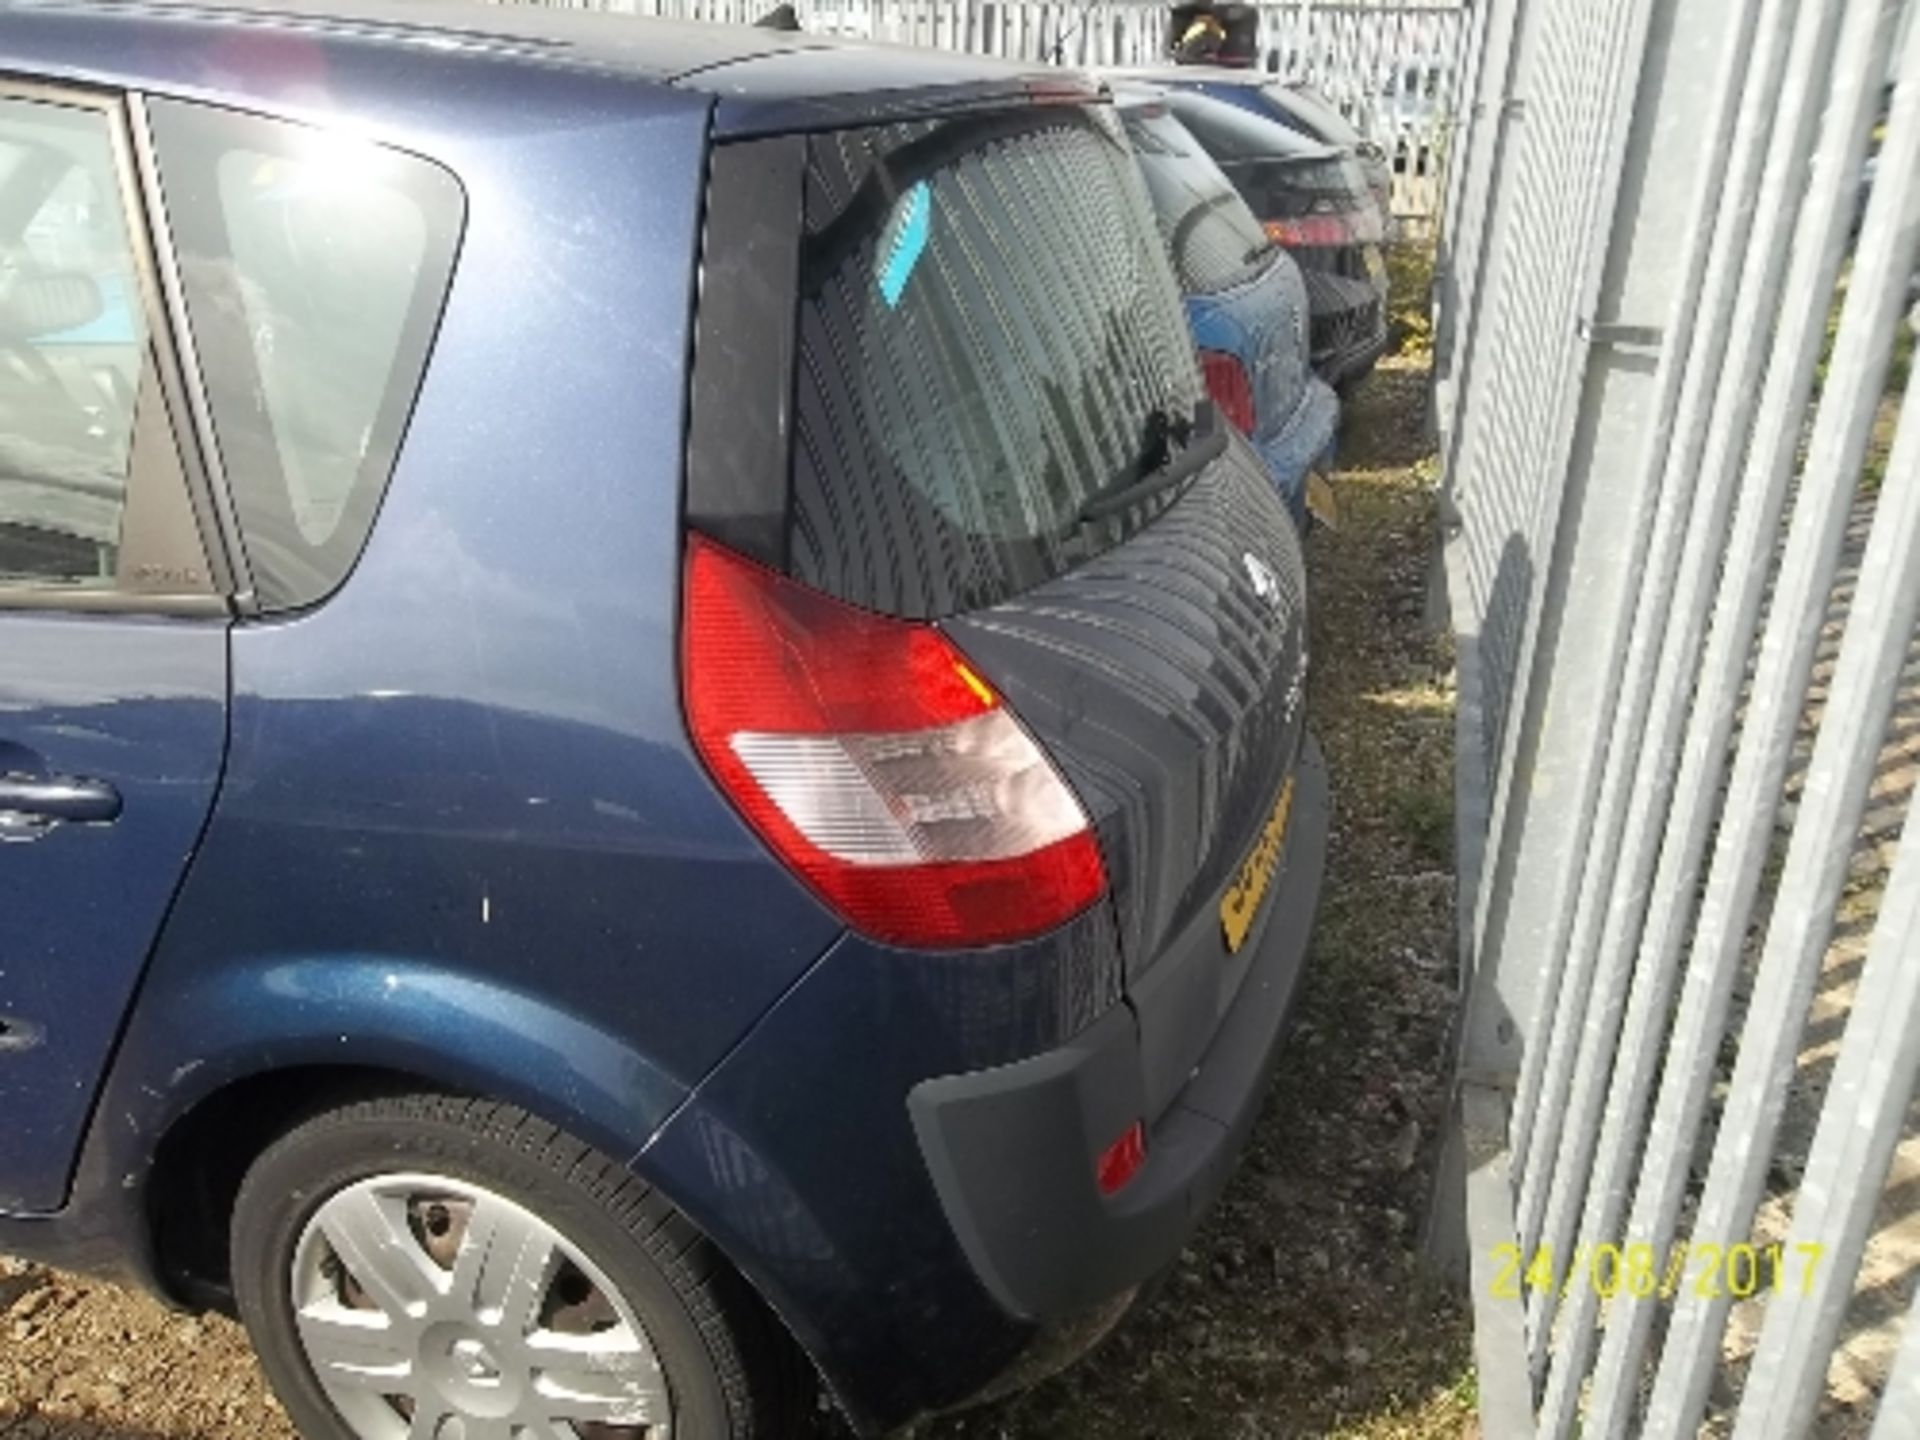 Renault Scenic Expression DCI 120 - SC53 GWD Date of registration: 18.12.2003 1870cc, diesel, - Image 3 of 4